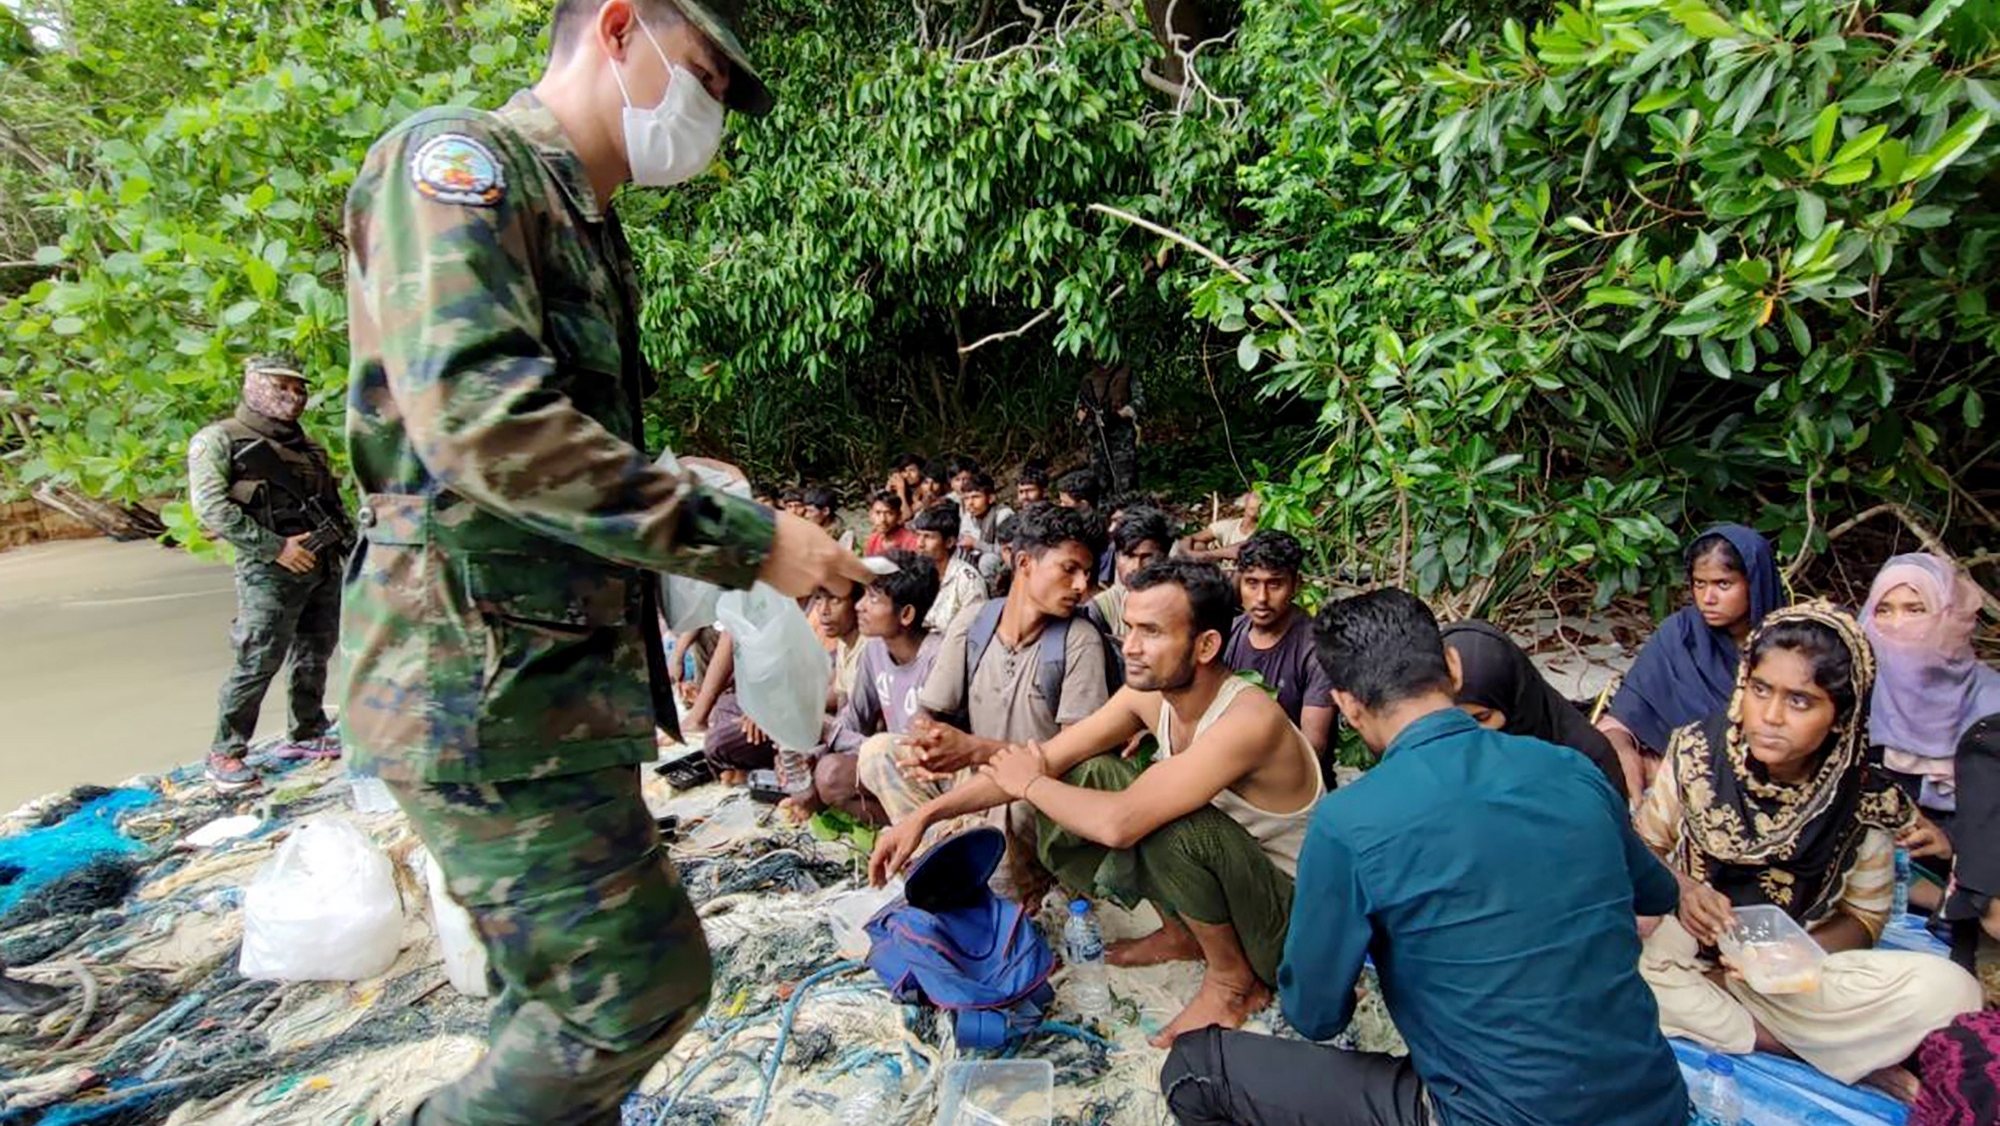 epa09996854 A handout photo released by Royal Thai Navy shows a Thai soldier assisting Rohingya refugees after being found on Dong island, near the Thai-Malaysia border in Satun southernmost province of Thailand, 04 June 2022 (issued 05 June 2022). Thai officials and Royal Navy found and assisted 59 undocumented Rohingya migrants on an island in southern Thailand. The migrants, through human trafficking gangs, arrived to Thailand in vessels, hoping to reach Malaysia afterwards to find work.  EPA/ROYAL THAI NAVY HANDOUT EDITORIAL USE ONLY/ NO SALES HANDOUT EDITORIAL USE ONLY/NO SALES